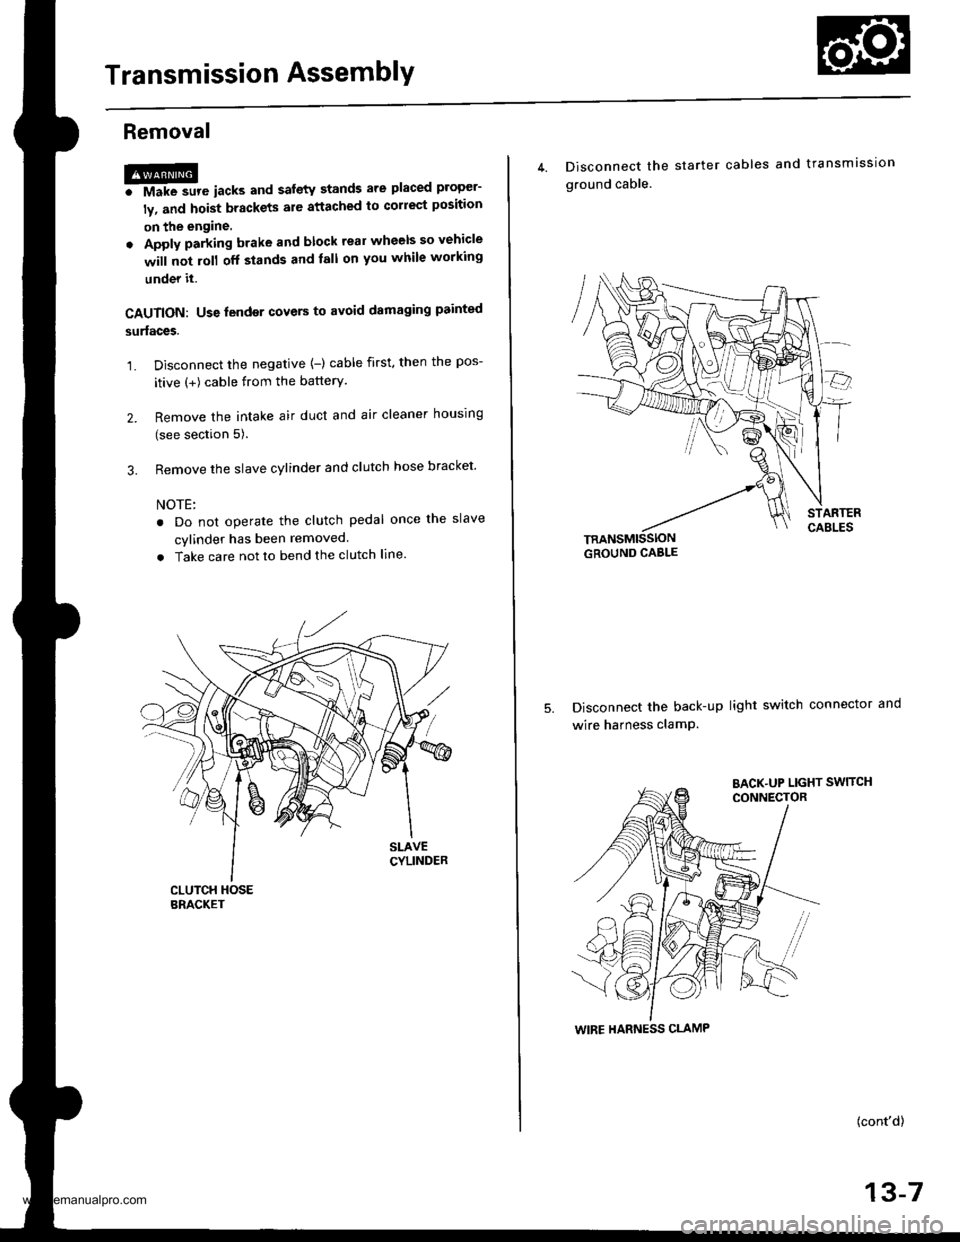 HONDA CR-V 1999 RD1-RD3 / 1.G User Guide 
Transmission AssemblY
Removal
@FMak. sw. iack" and safety stands are placed propel-
ly, and hoist brackets are attached to collect position
on the engine,
. Apply parking brake and block rear wheels 